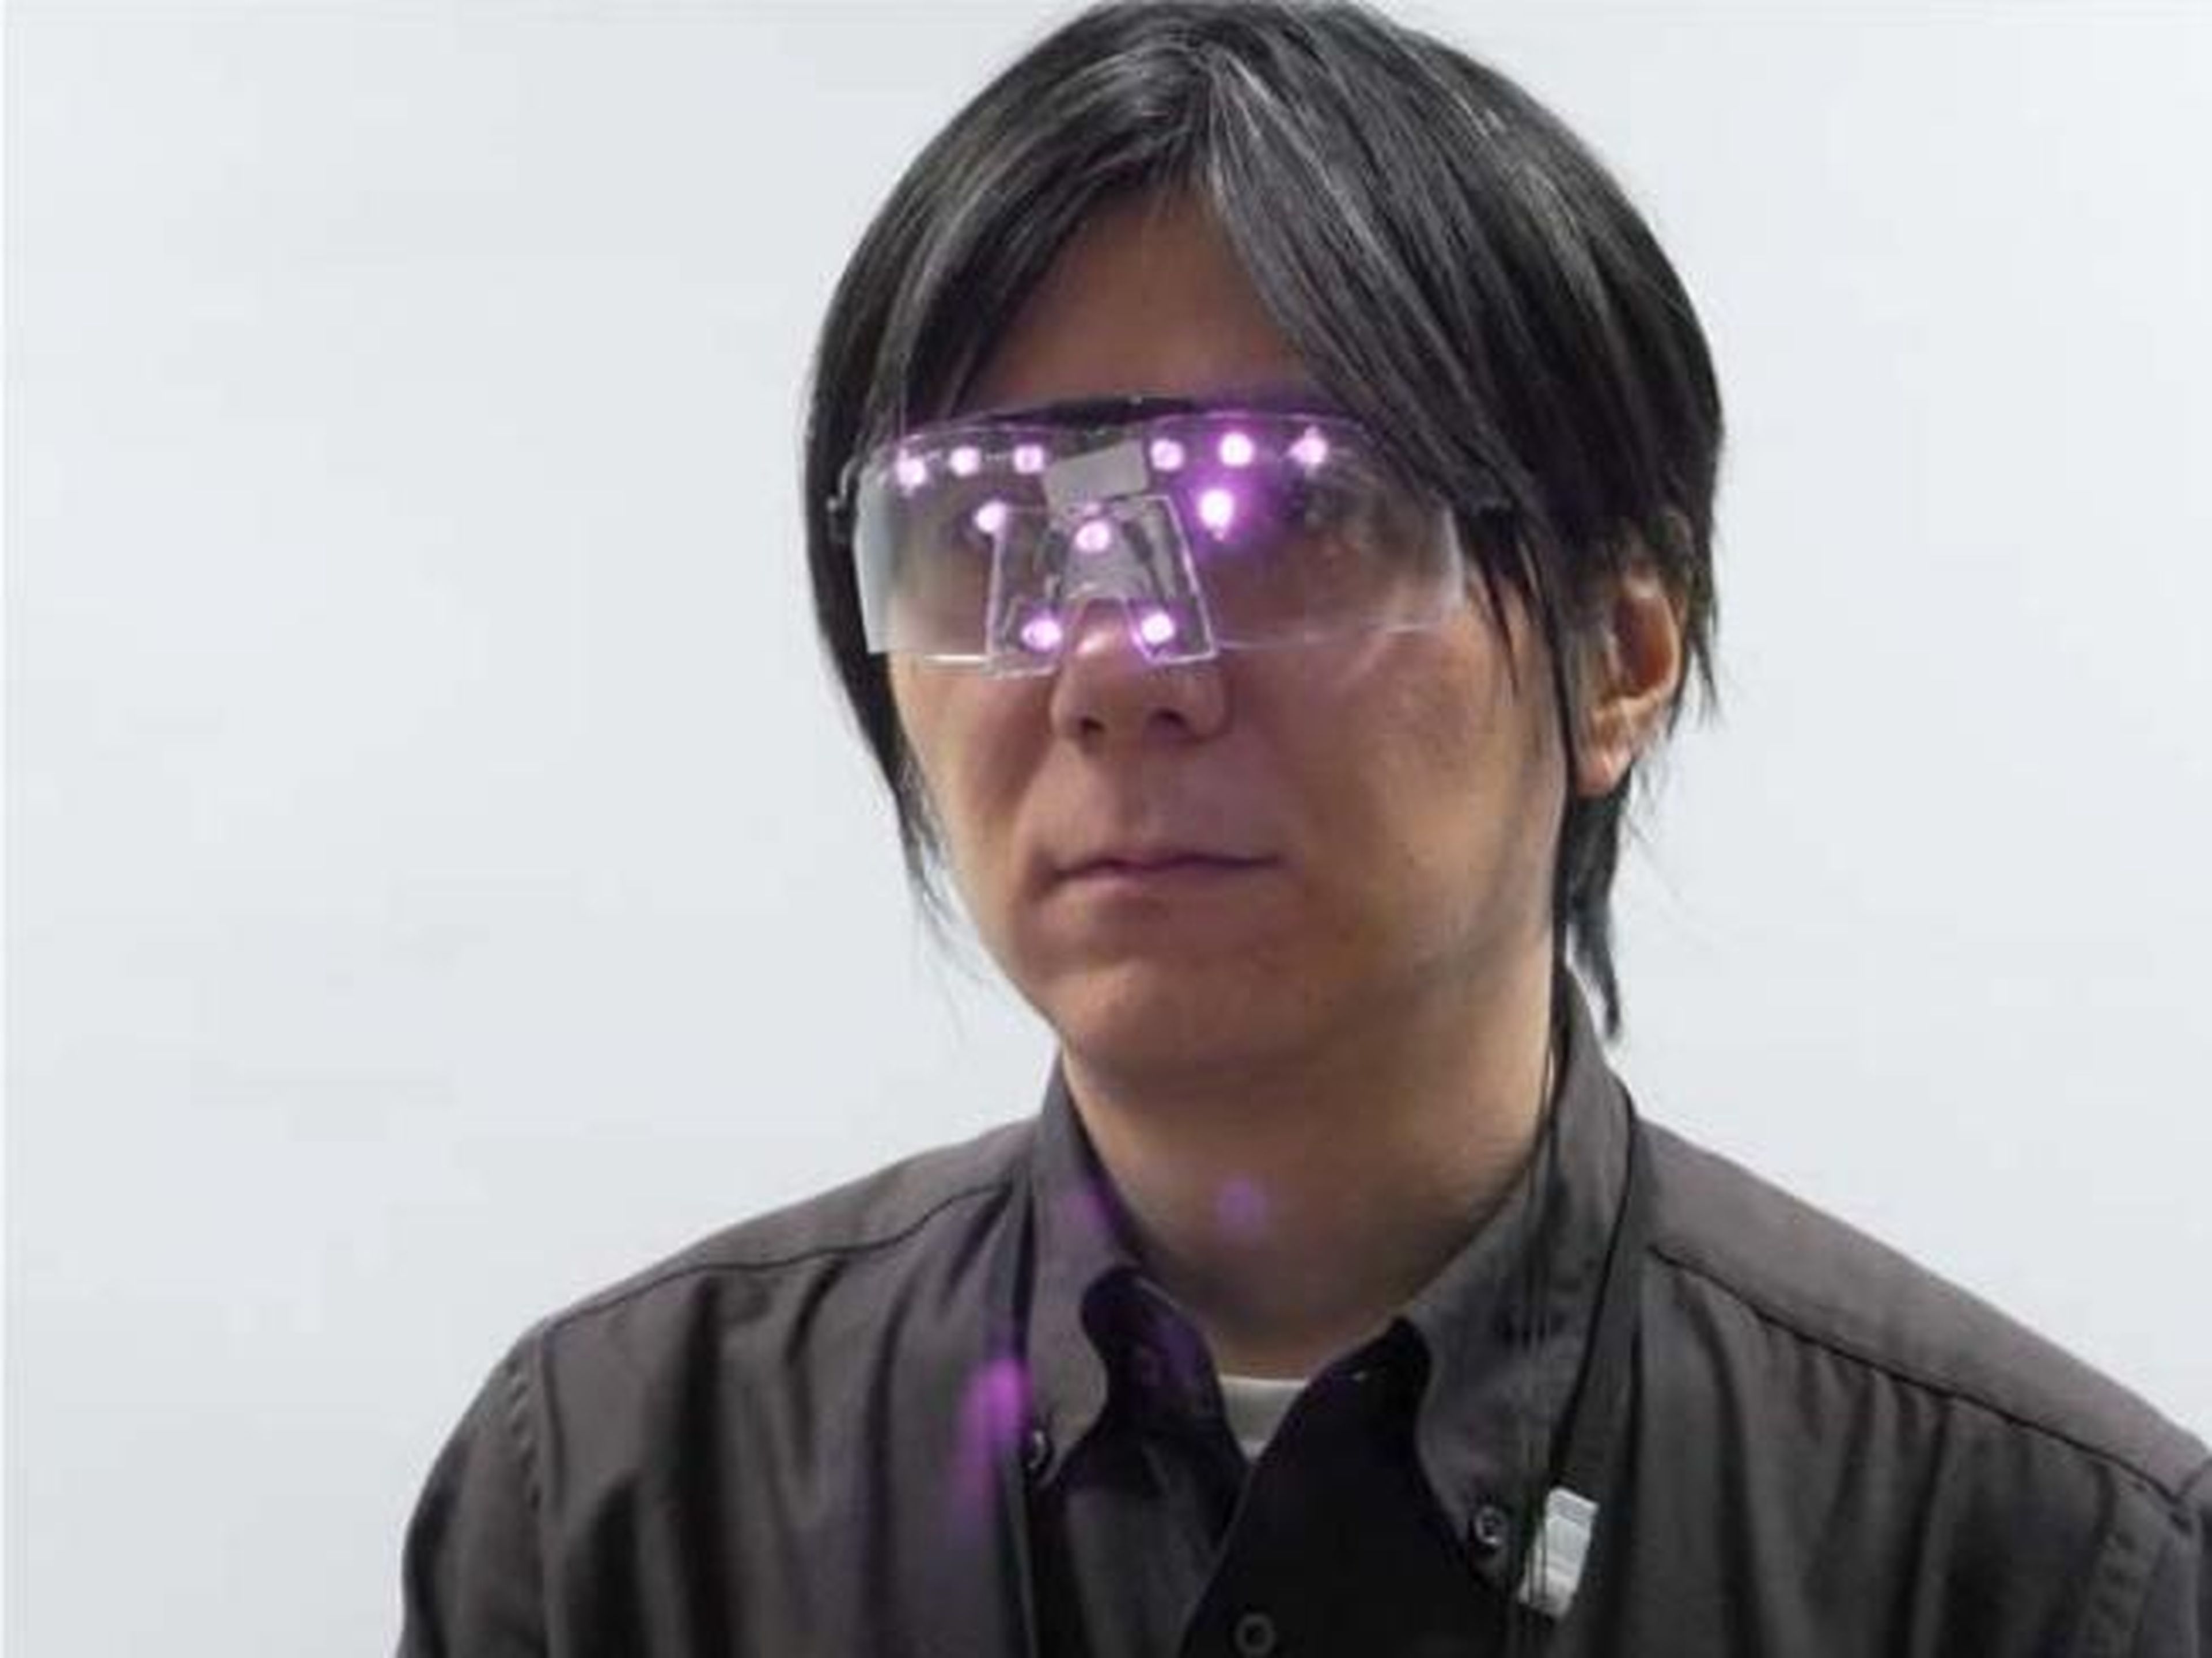 A Japanese college professor designed goggles fitted with LEDs that thwart facial recognition.